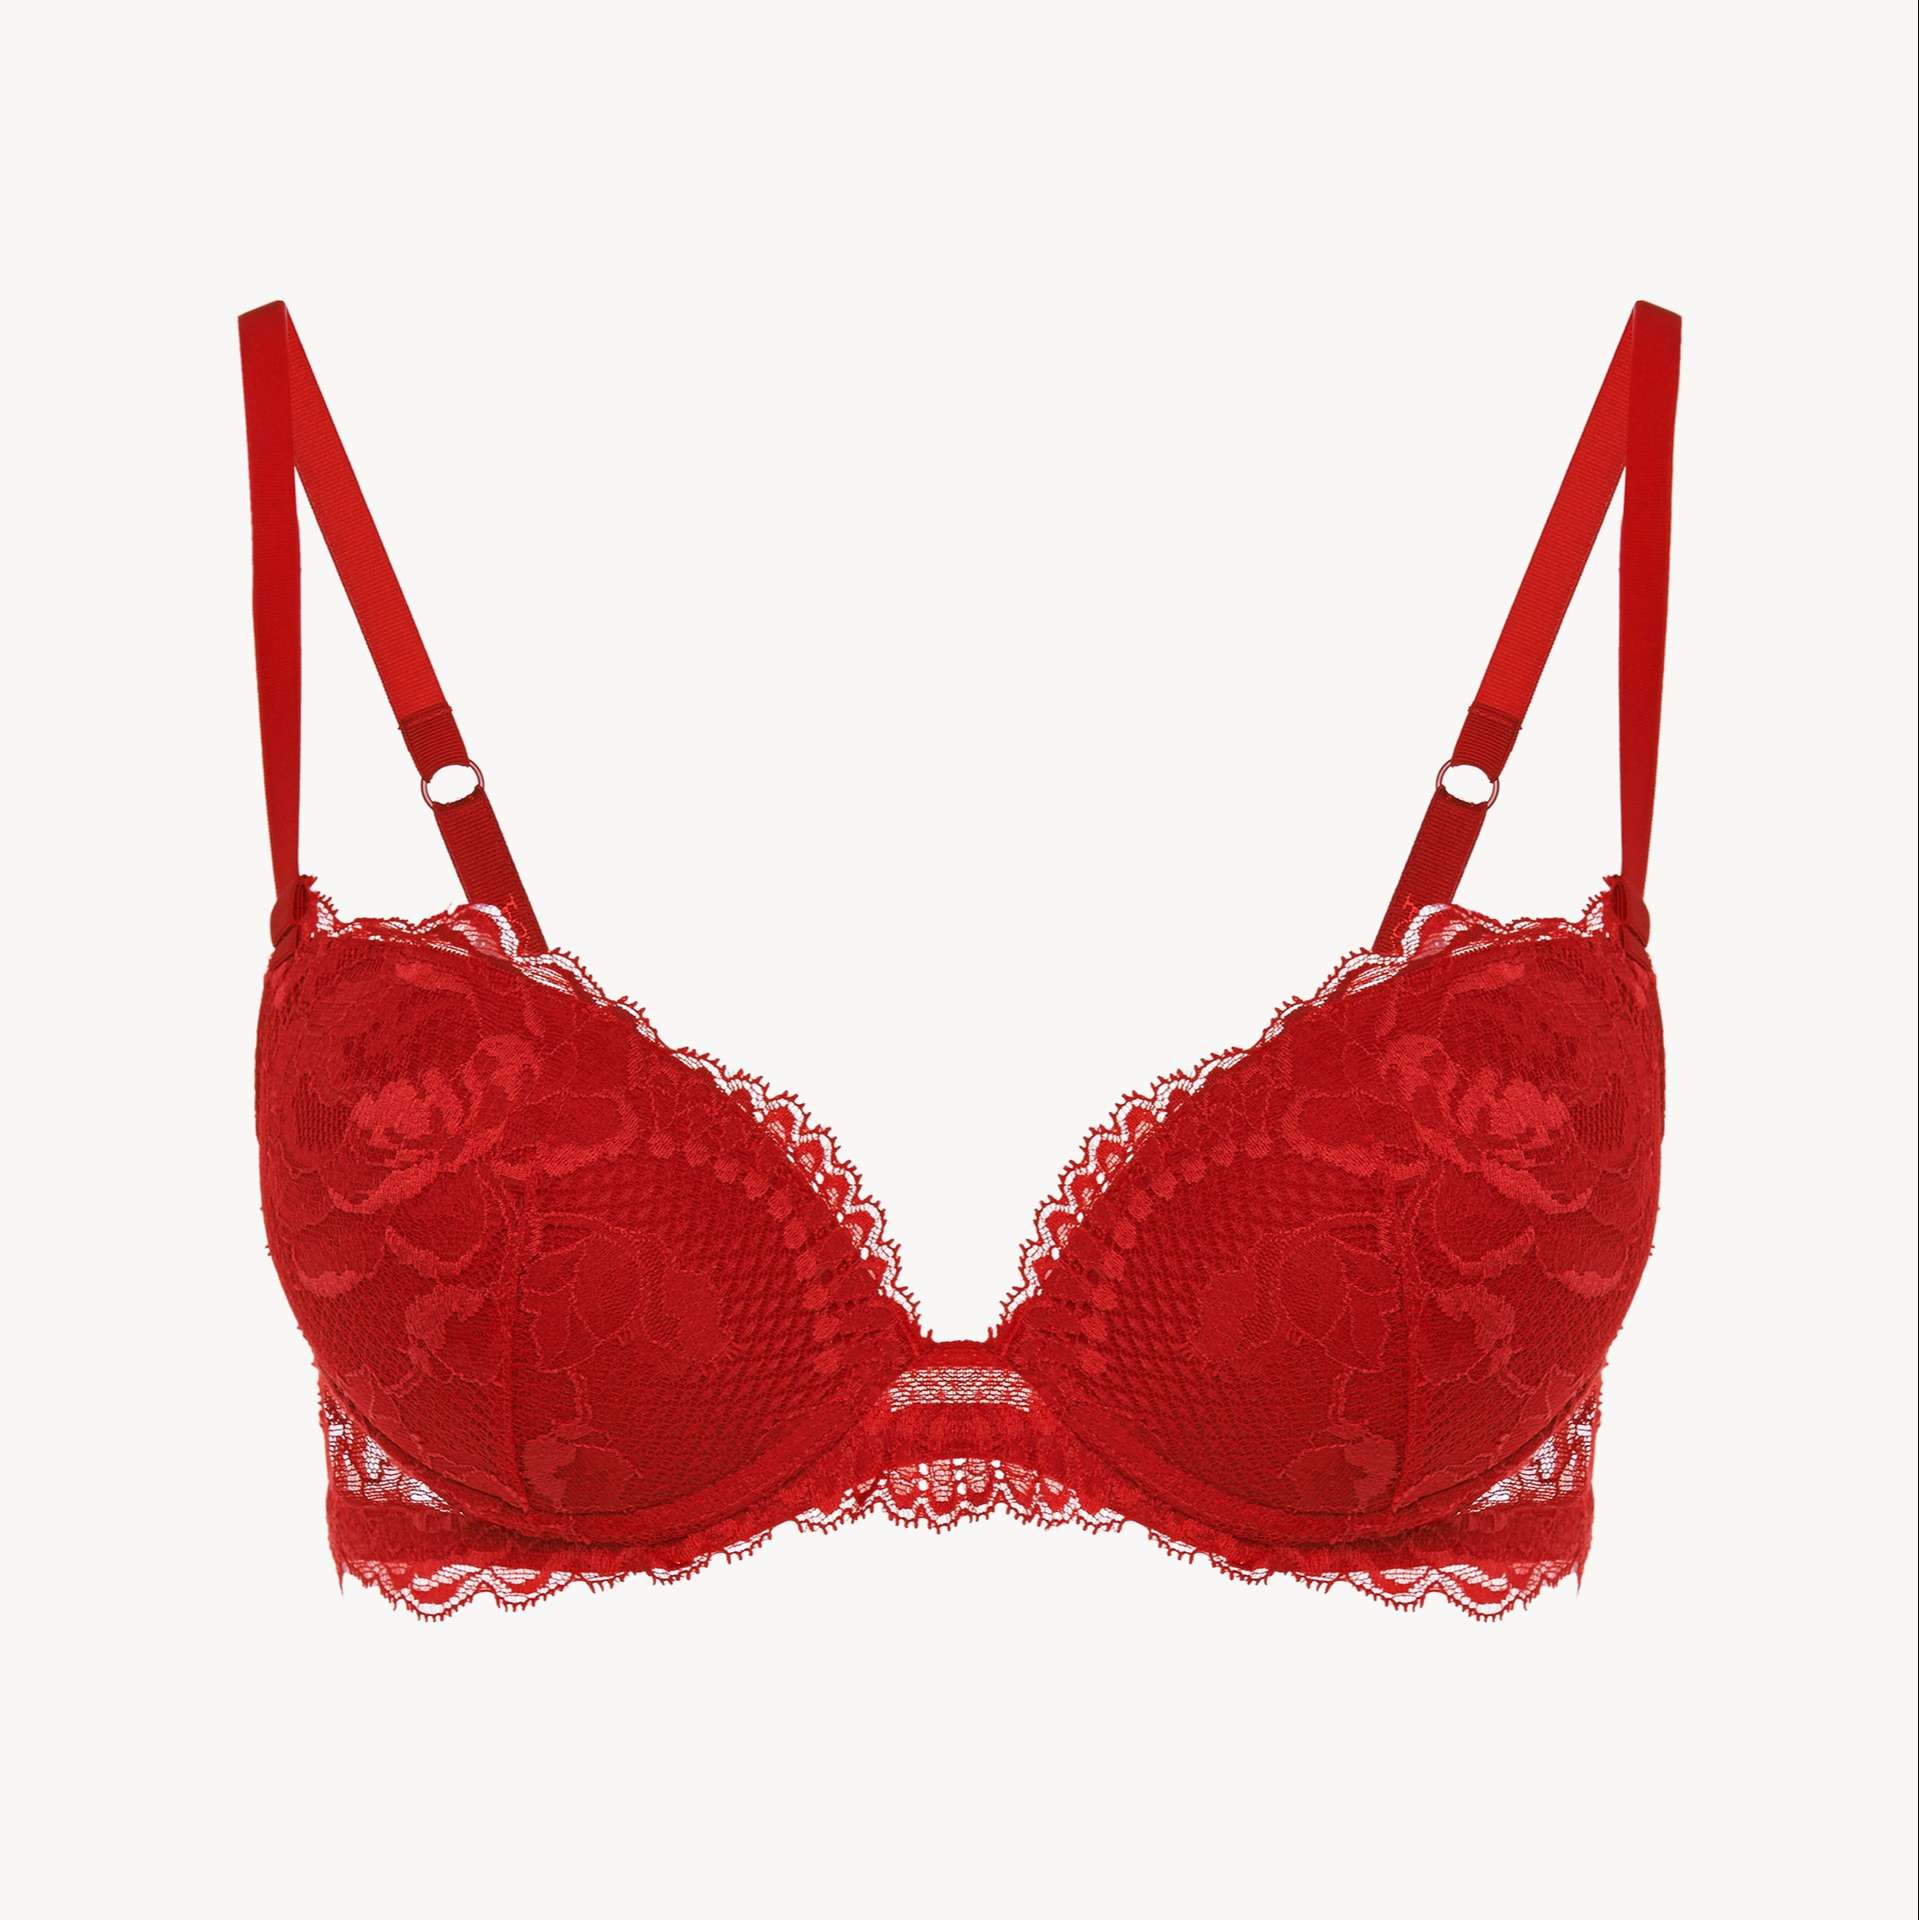 La Perla Lingerie Review - Must Read This Before Buying